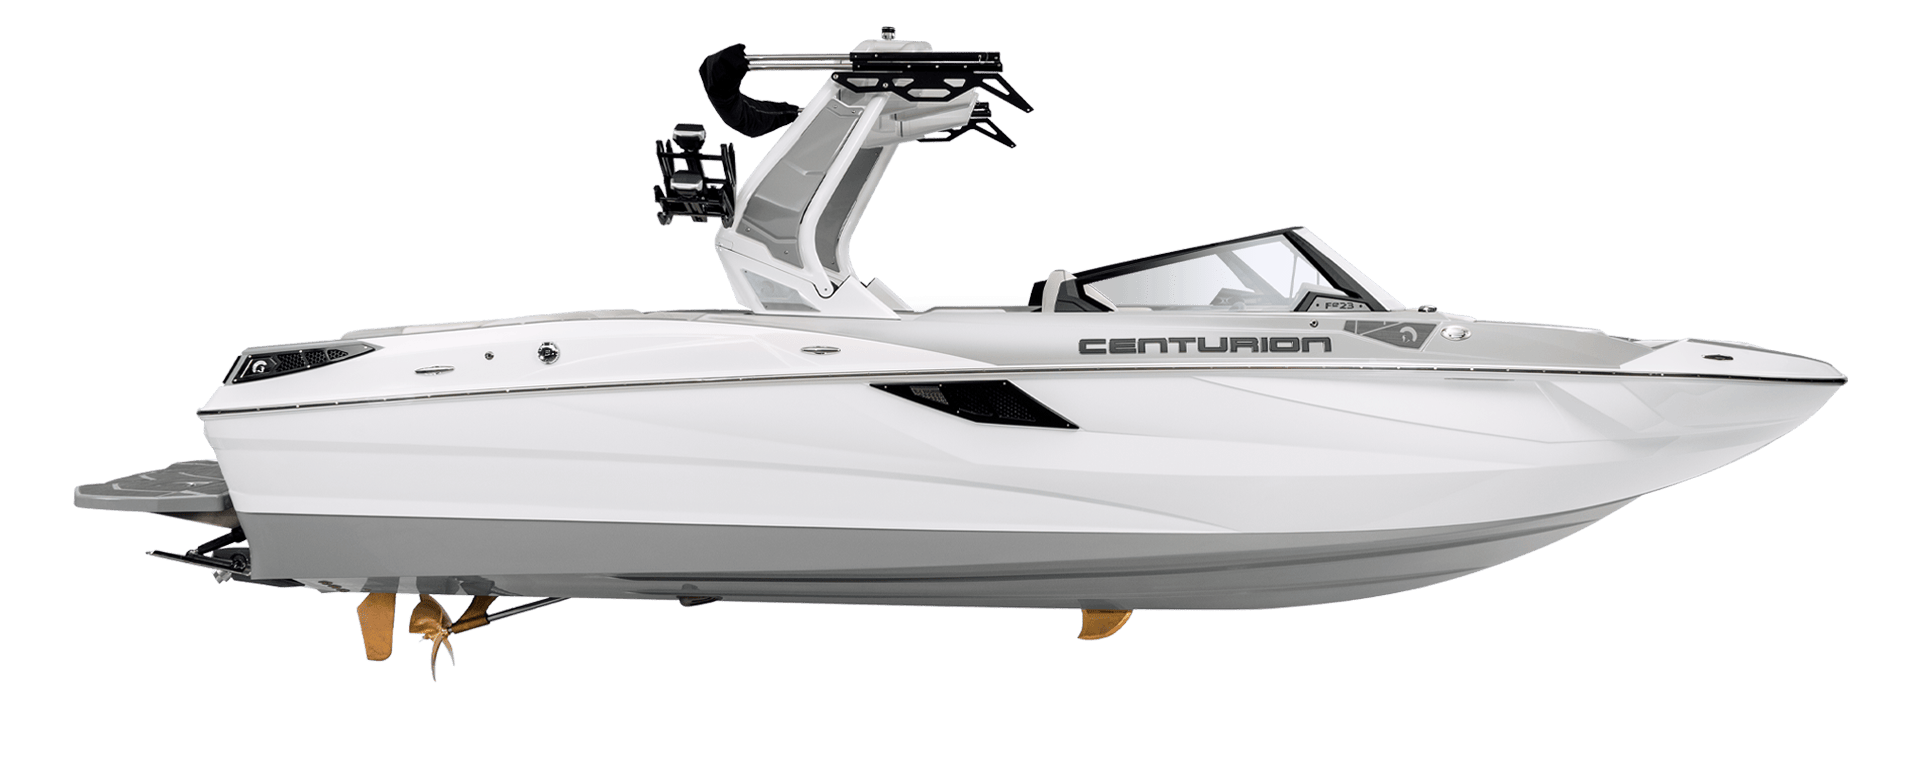 A white and gray Centurion Fe Series speedboat with a wakeboard tower and seating is displayed on a plain white background.